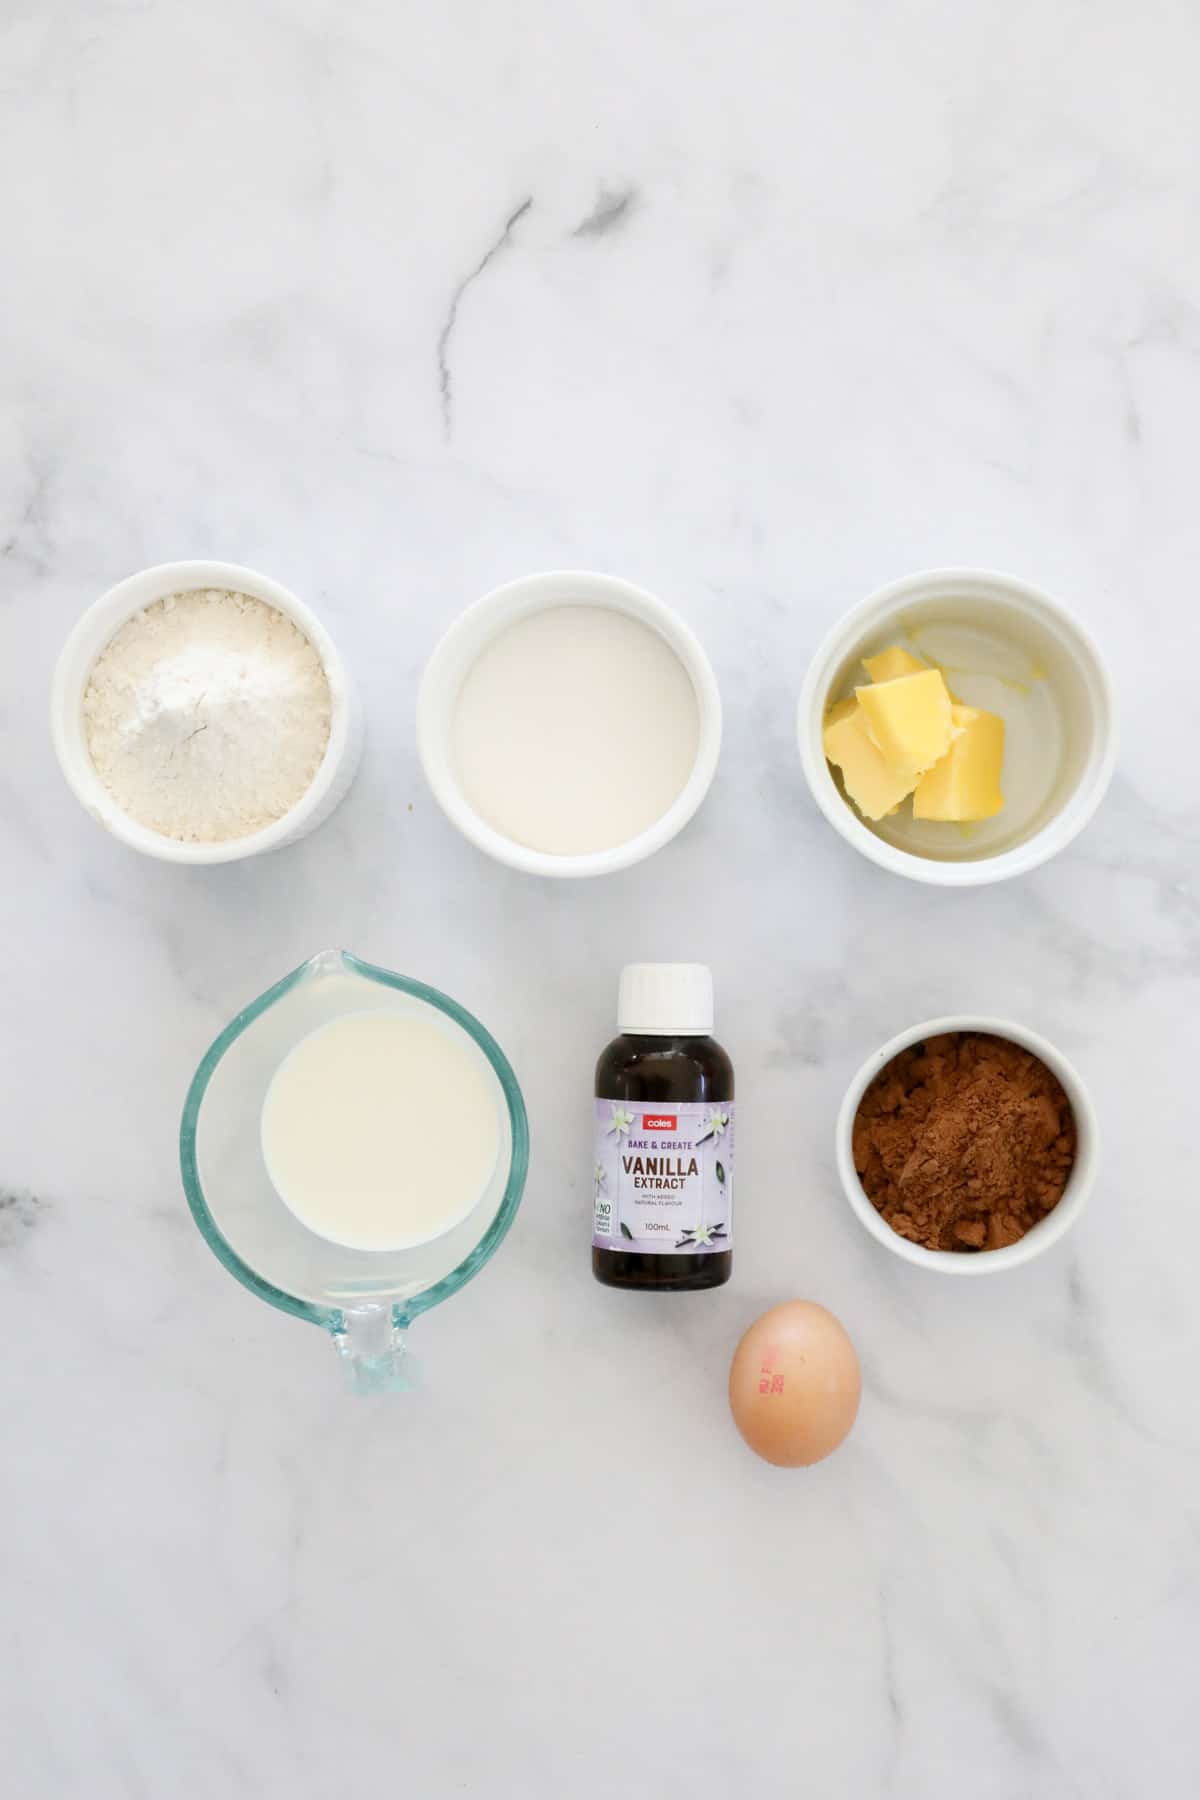 The ingredients for chocolate pudding.